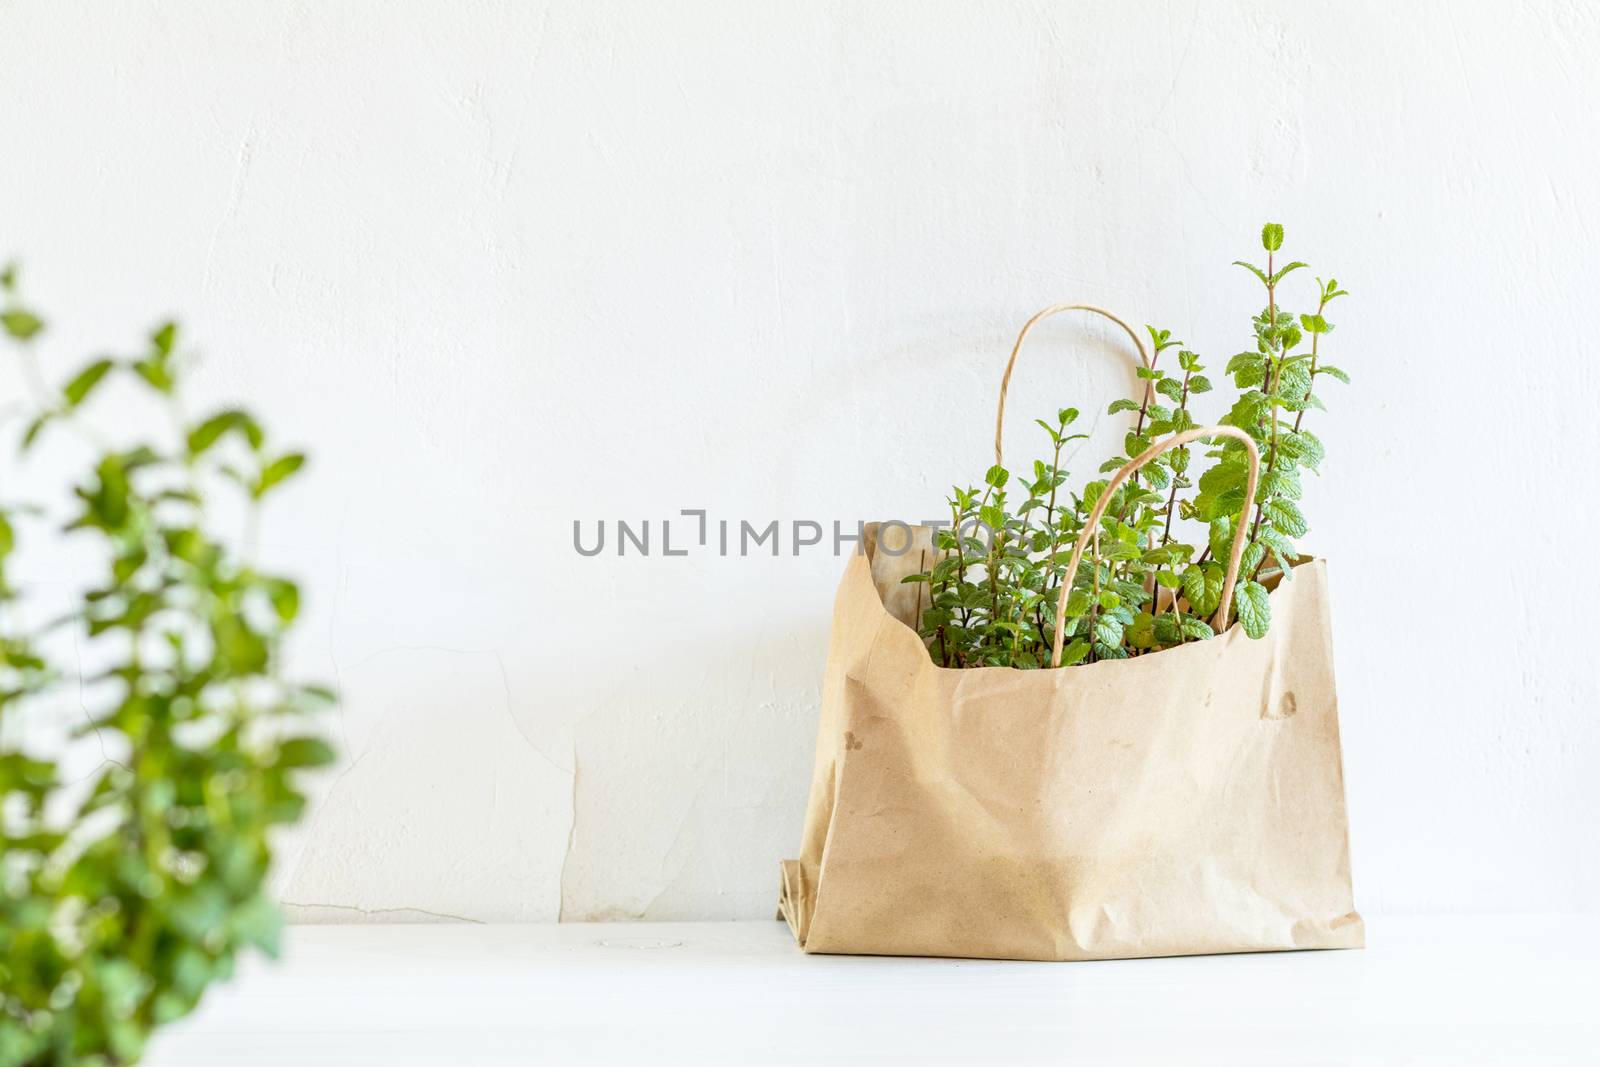 Spring gardening light concept. Fresh mint in a paper bag on a white table. White wall background.